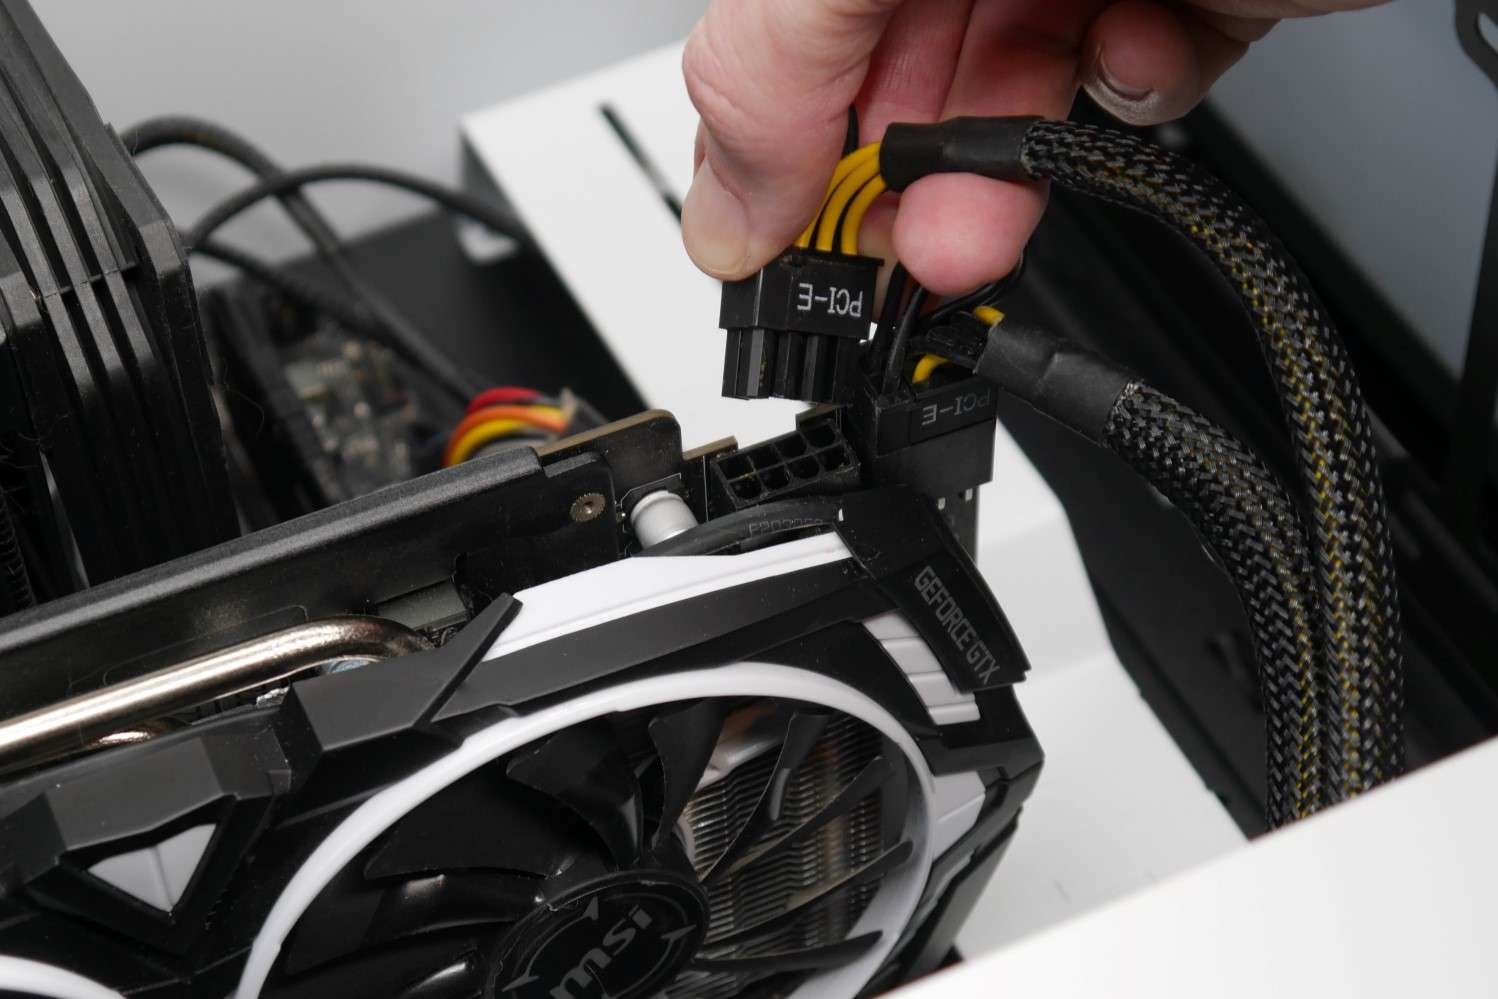 How To Check If GPU Is Getting Enough Power